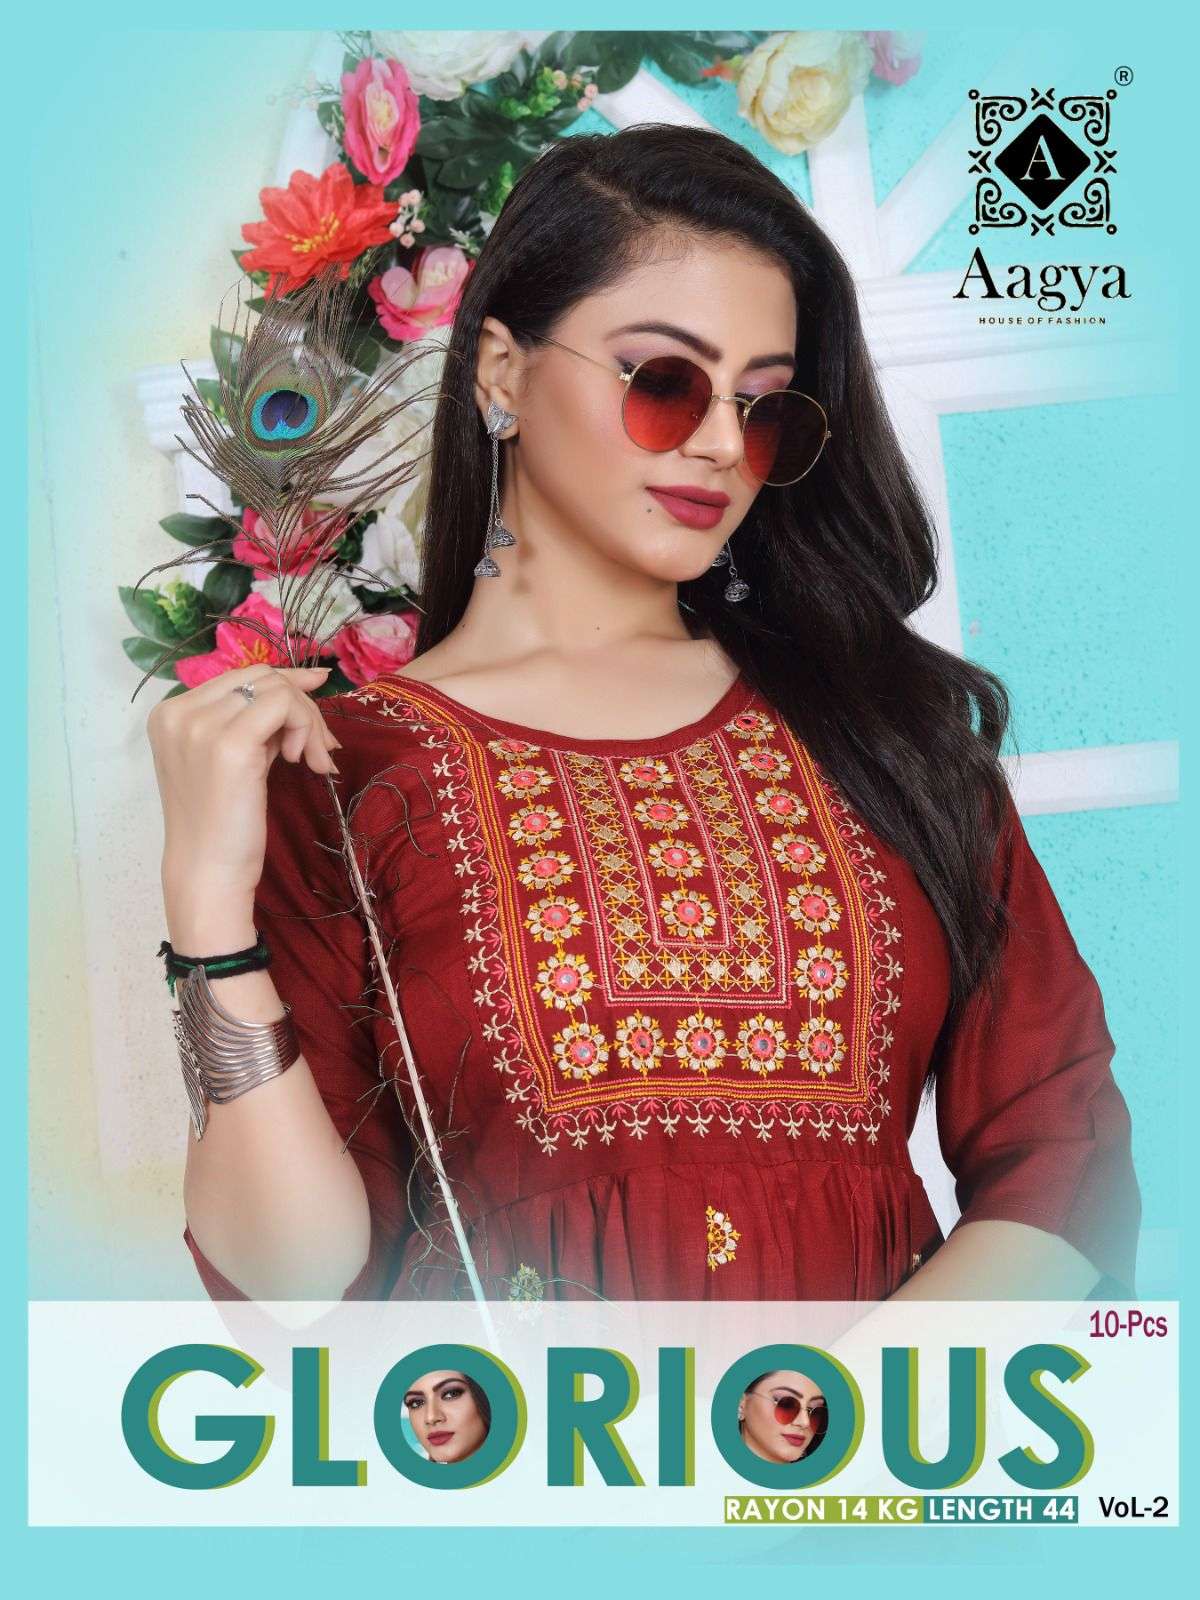 Aagya Glorious V.2 Rayon 14 Kg Embroidered Kurti with Chapti Pattern with All over and Galla Work KURTI CATALOG WHOLESALER BEST RATE